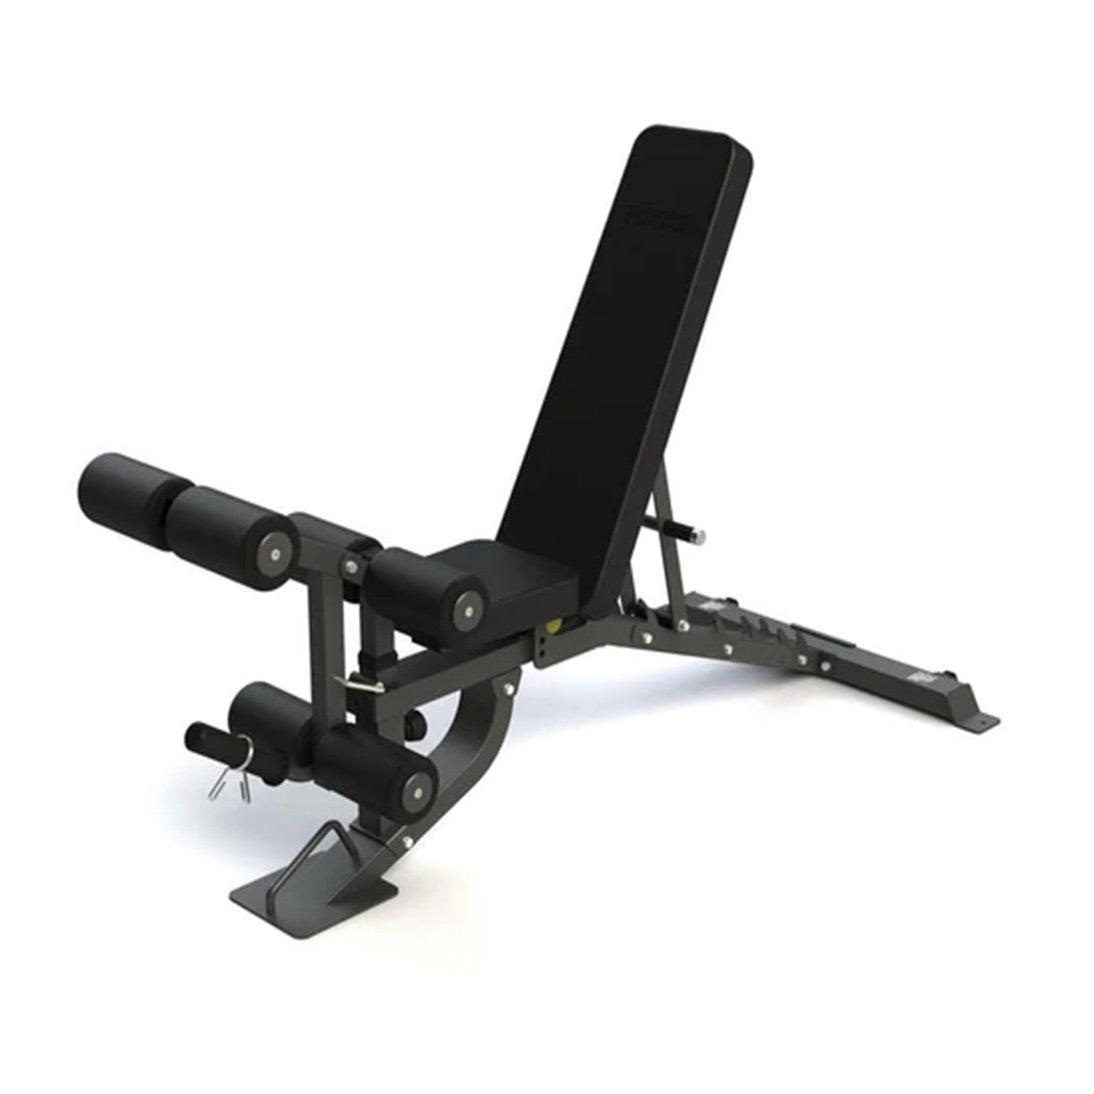 1441 Fitness FID Bench with Arm Leg Attachment - A8009-Exercise Benches-Pro Sports